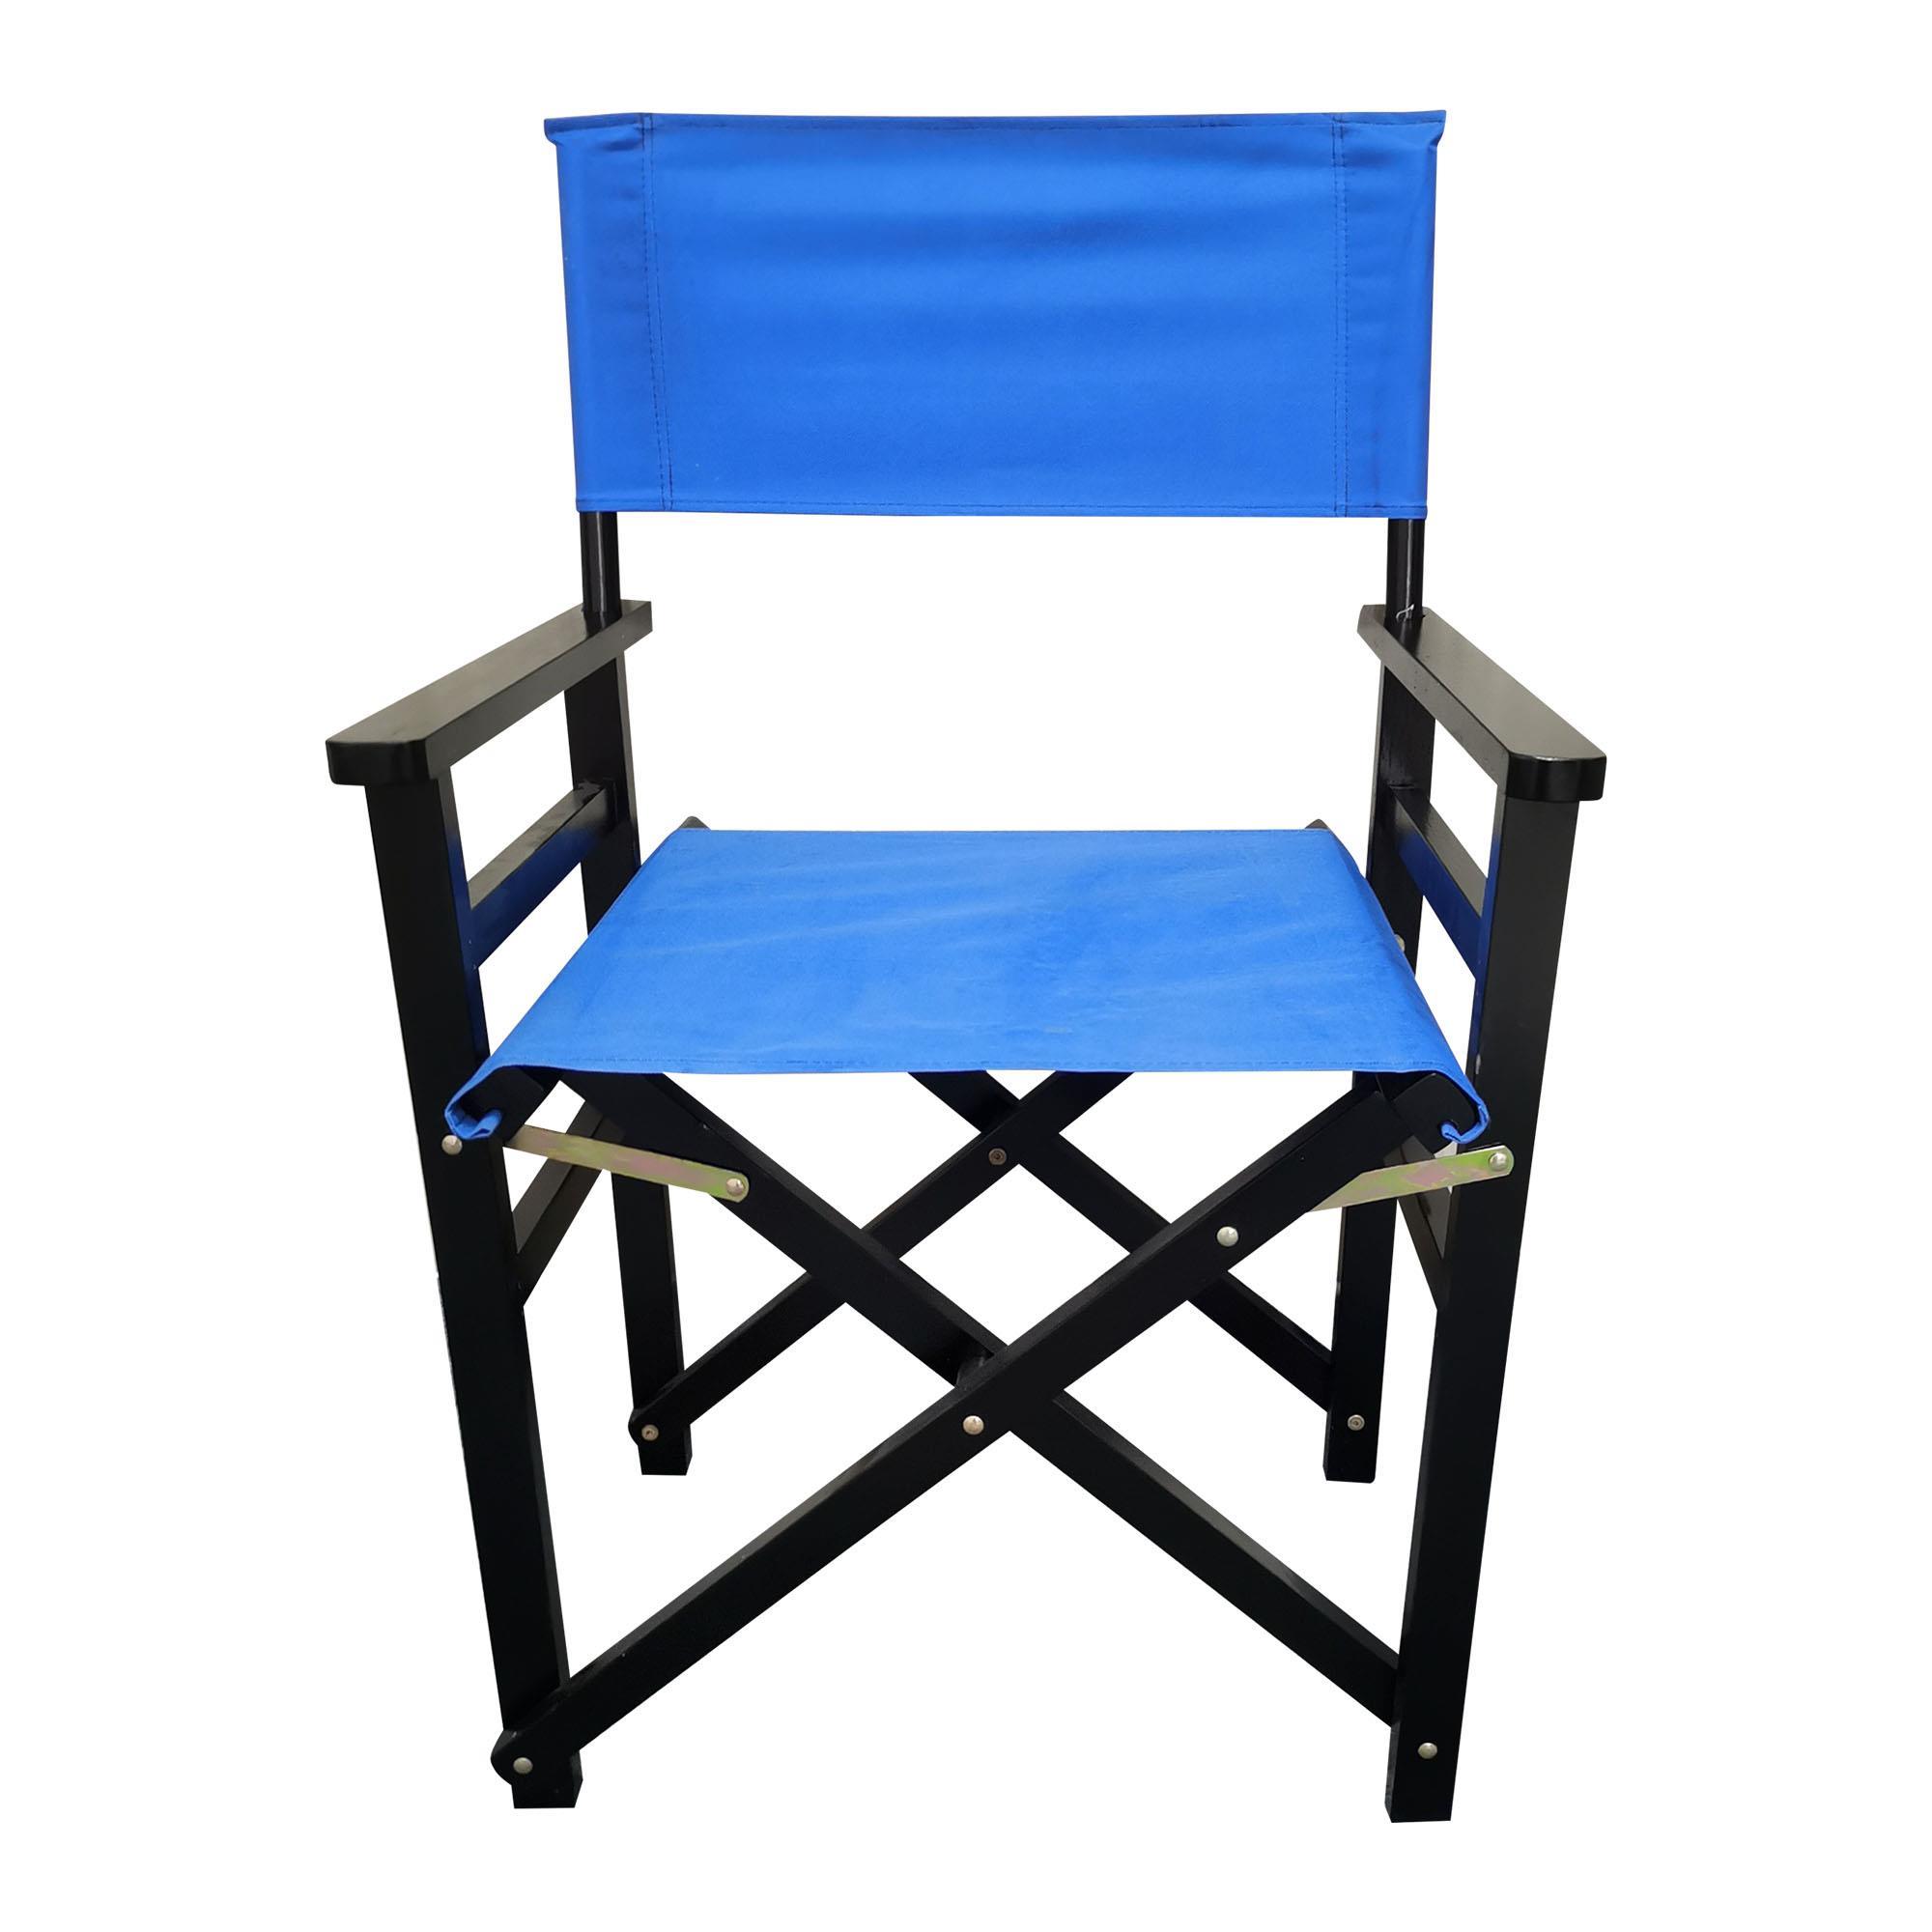 UBesGoo 2 Piece Folding Chair Wooden Director Chair Canvas, Casual Directors Chair, Black Frame-with Blue Canvas - image 4 of 11